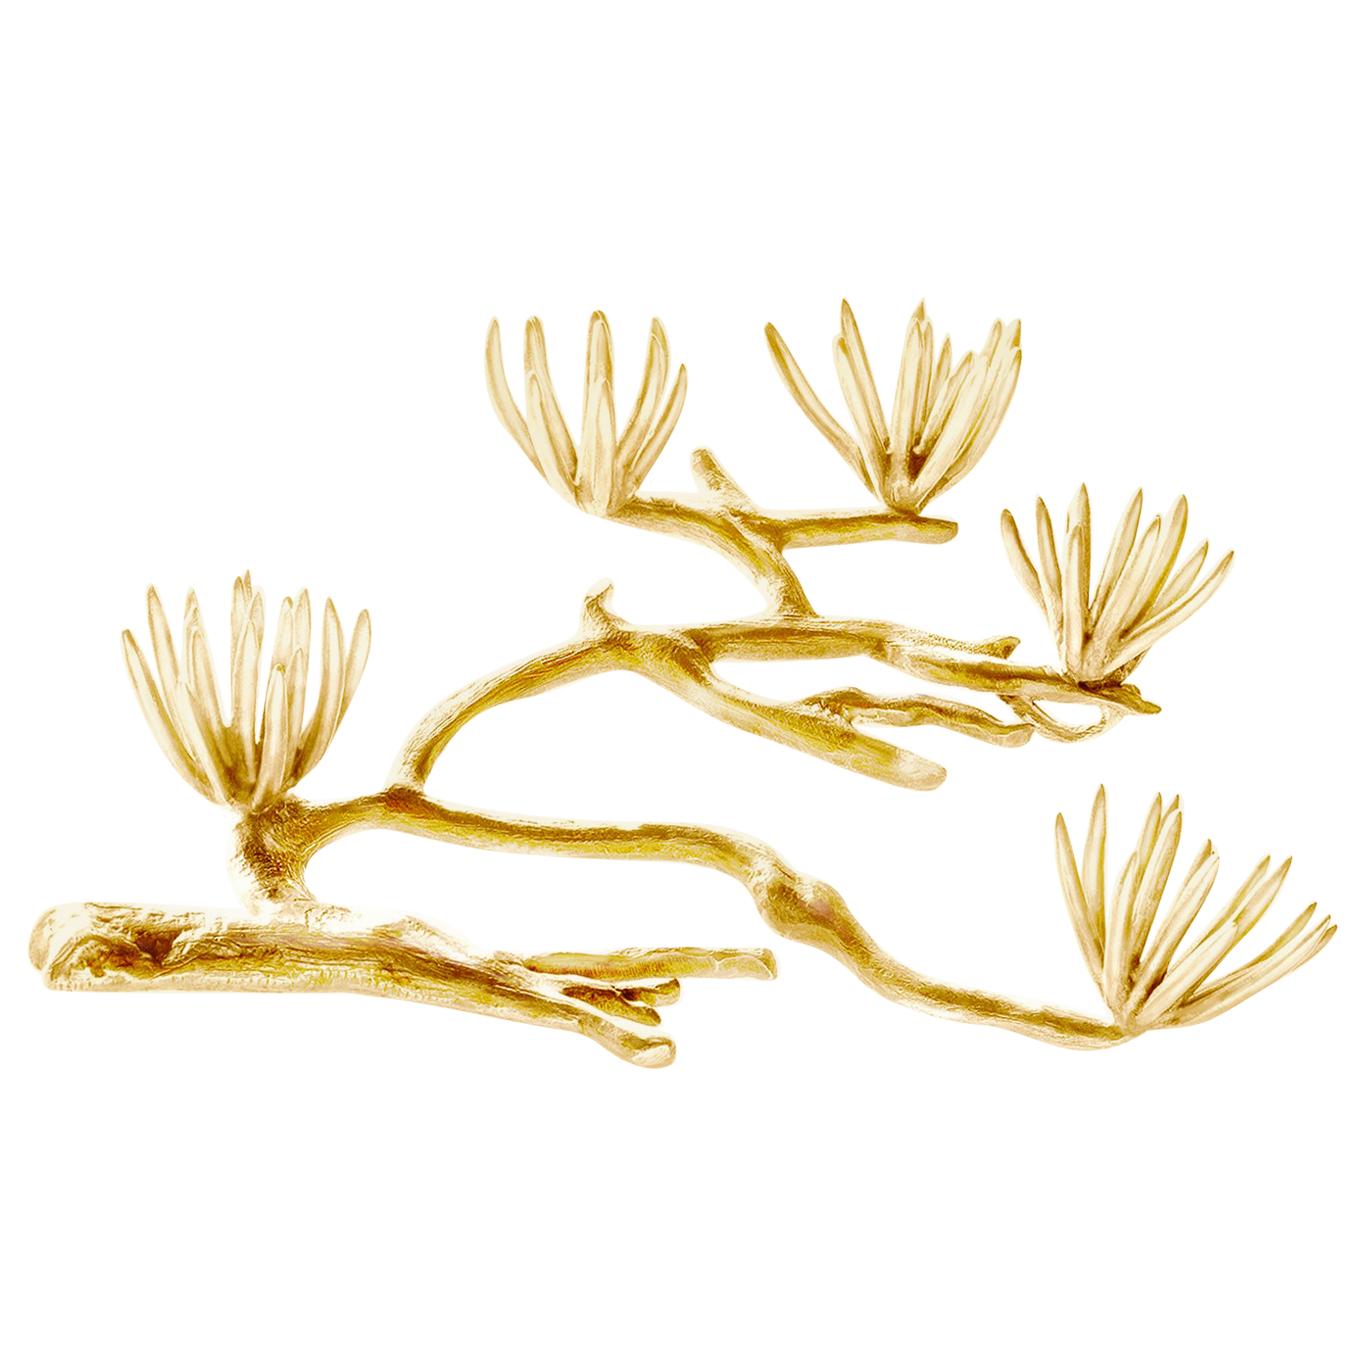 Featured in Vogue Yellow Gold Pine Sculptural Brooch by the Artist For Sale